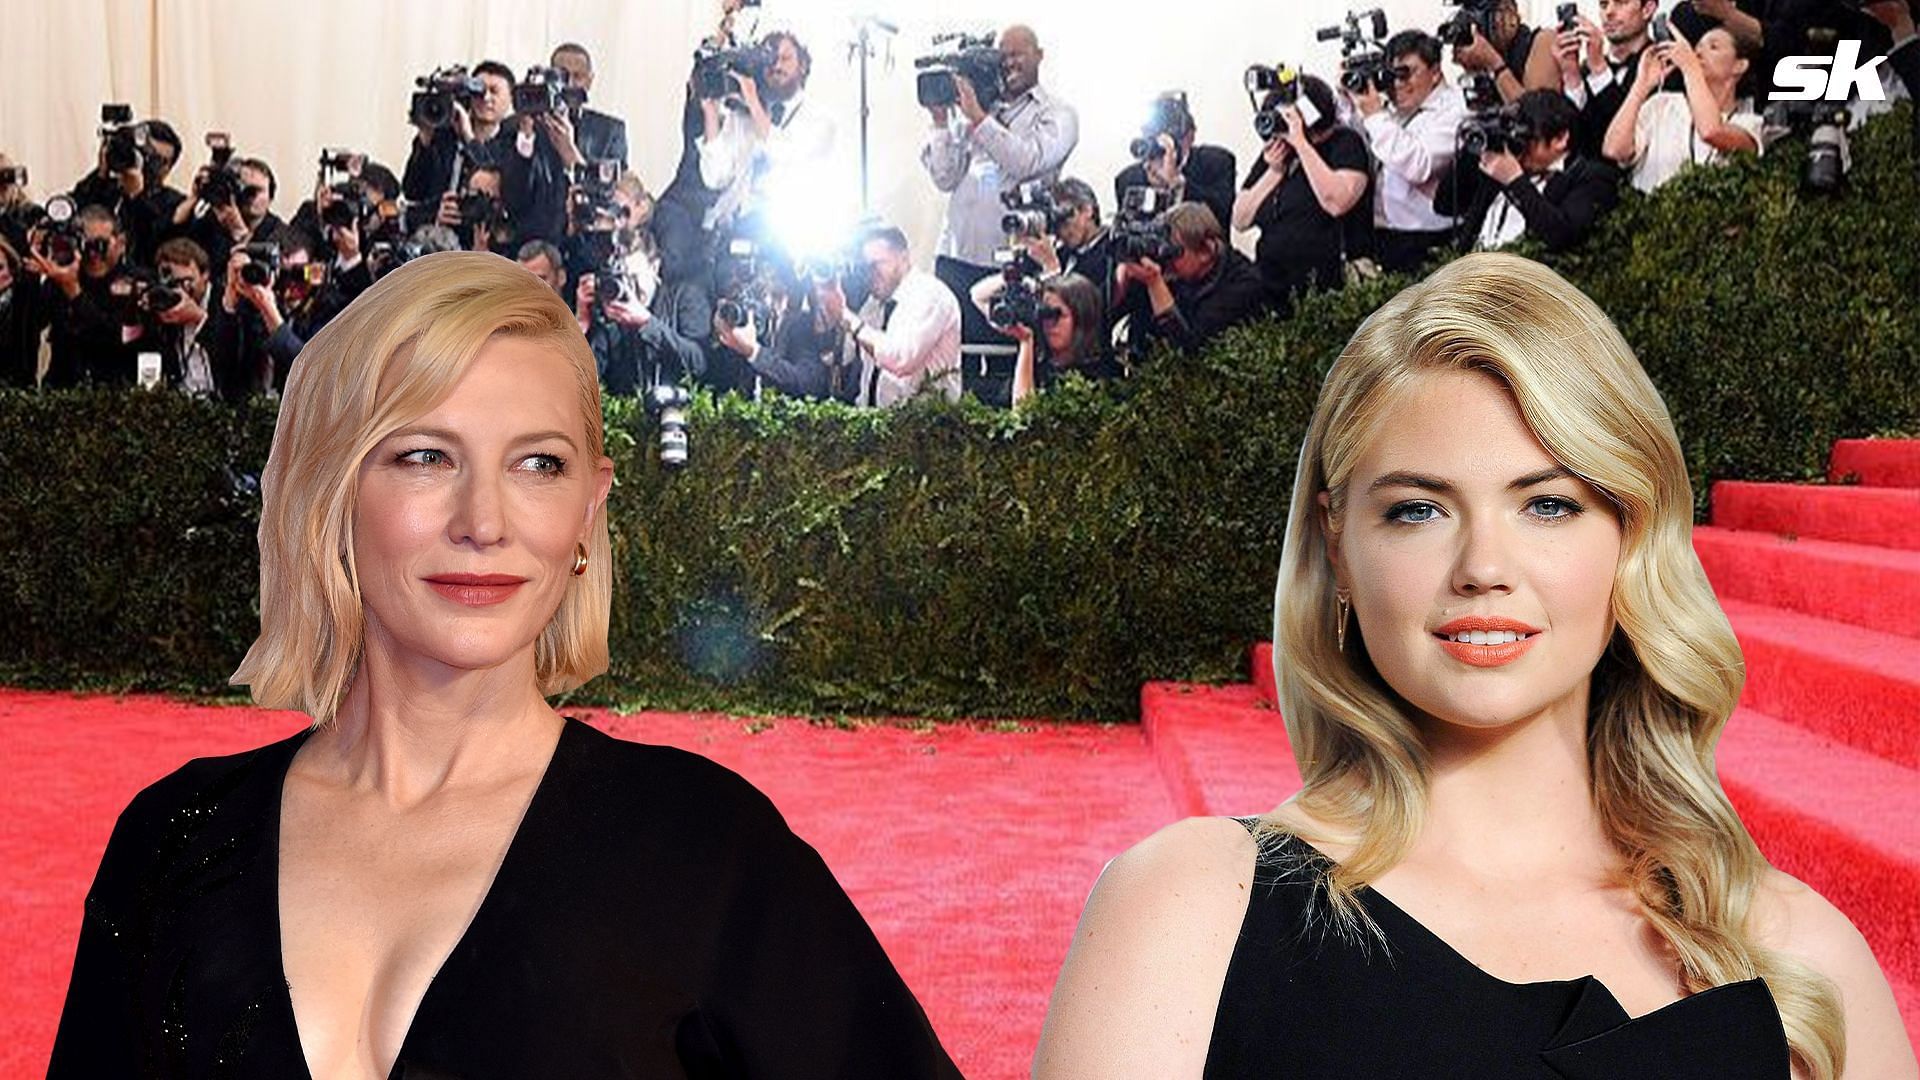 Cate Blanchett was confused for Kate Upton